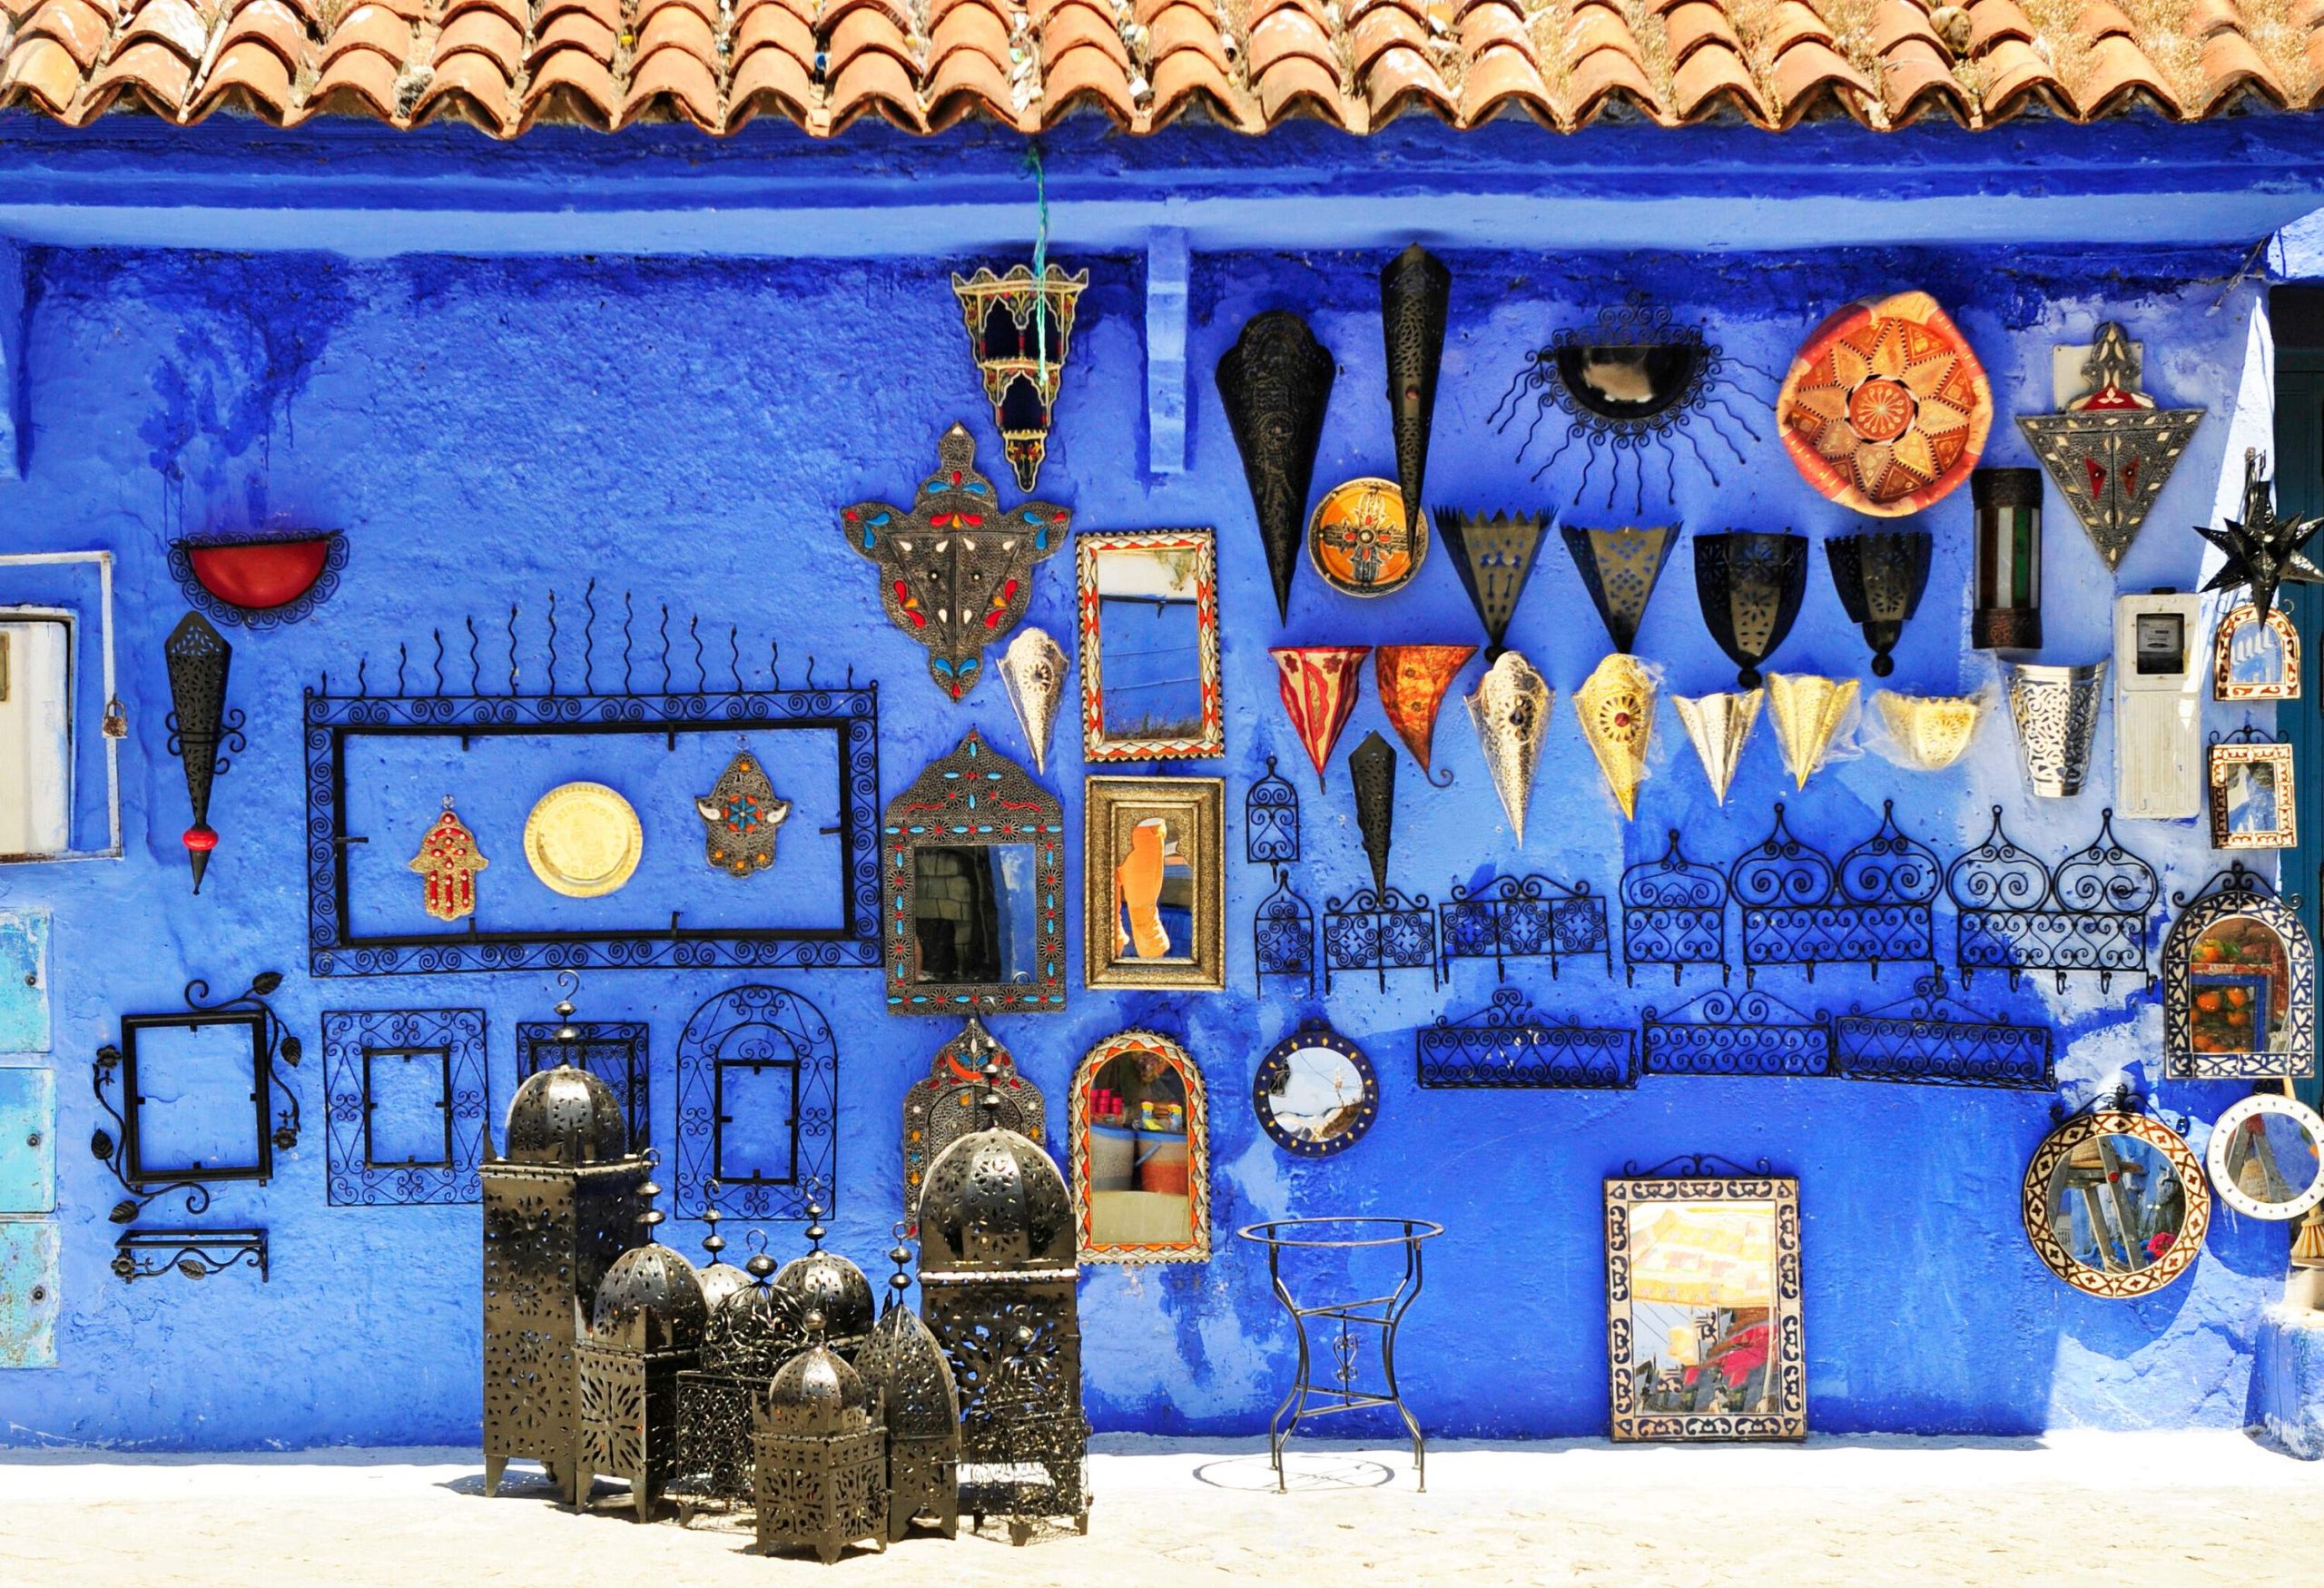 A blue stucco wall adorned with colourful ornaments in various shapes and sizes.